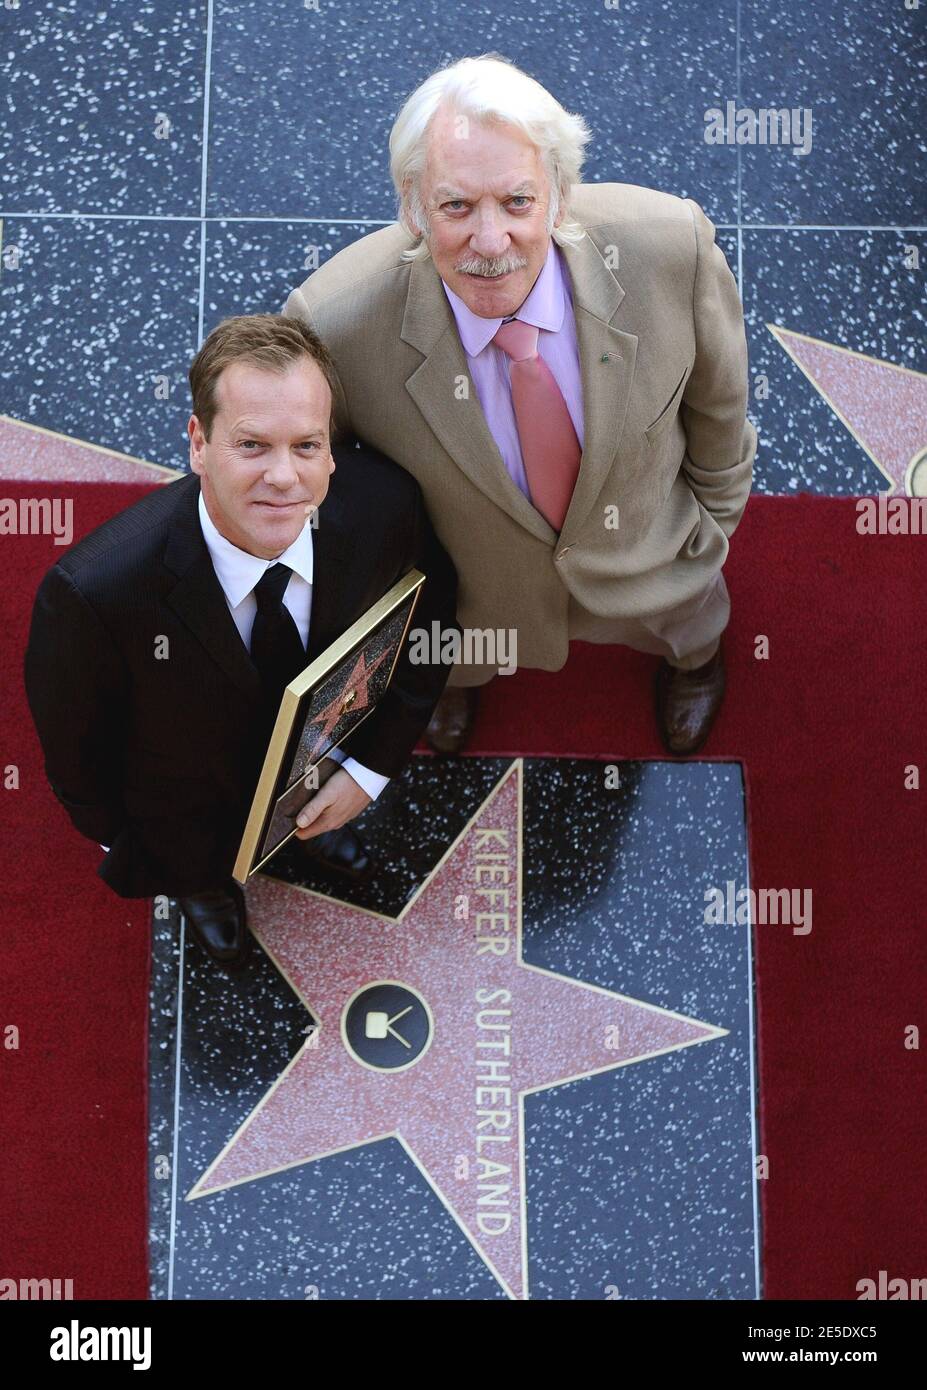 Kiefer Sutherland is honored with the 2,377th star on the walk of fame in Hollywood, Los Angeles, CA, USA on December 9, 2008. Photo by Lionel Hahn/ABACAPRESS.COM Stock Photo